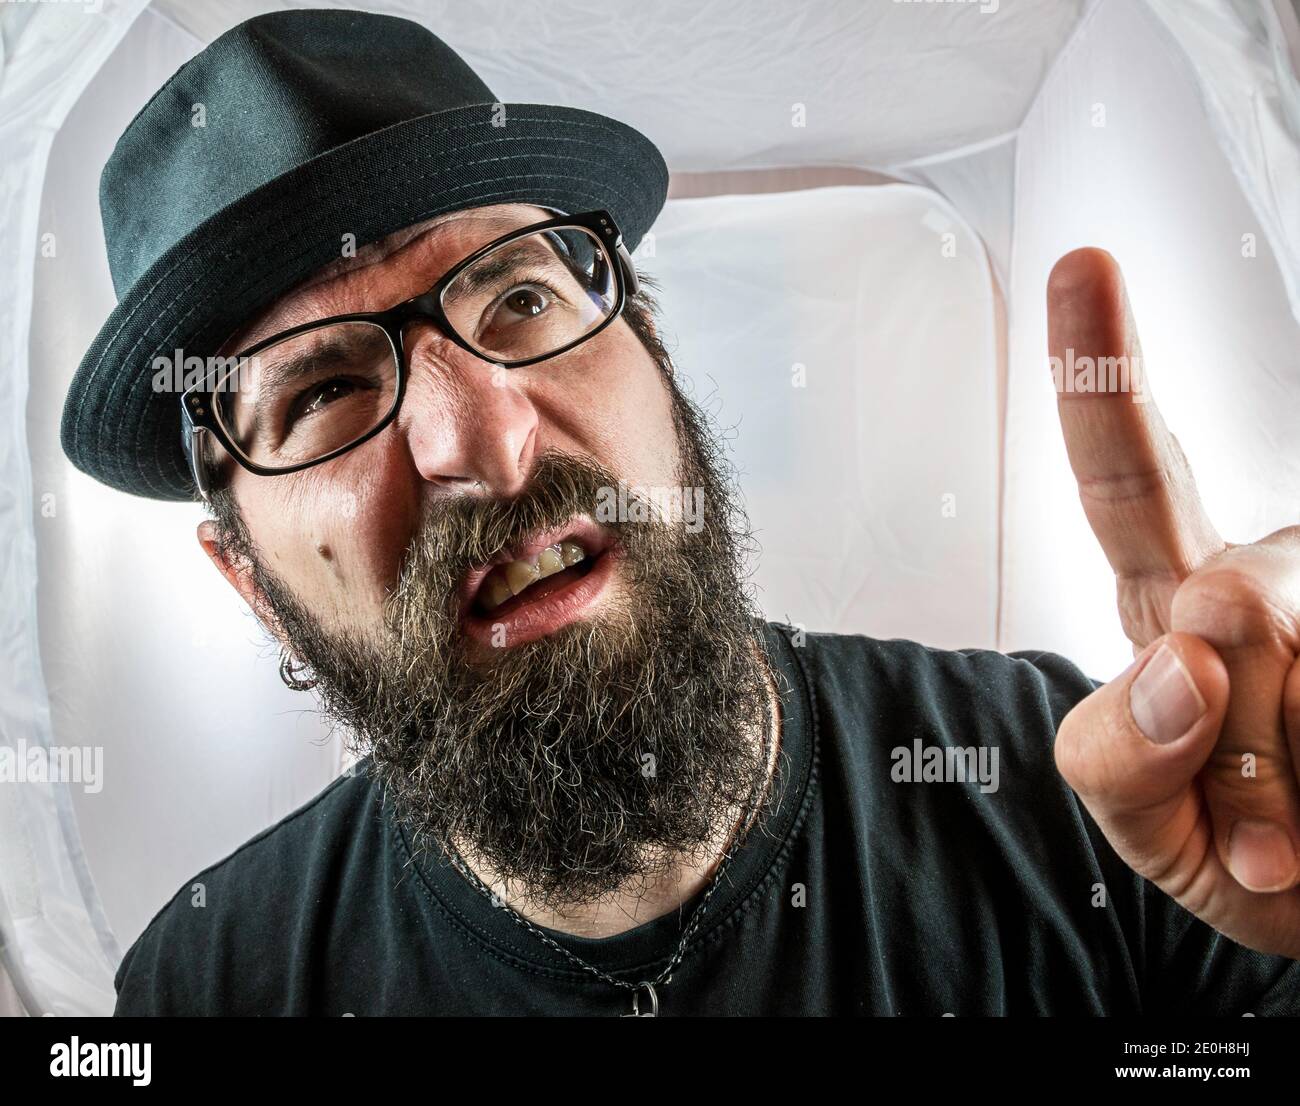 A bearded man with black glasses and hat showing finger and looking questioning Stock Photo